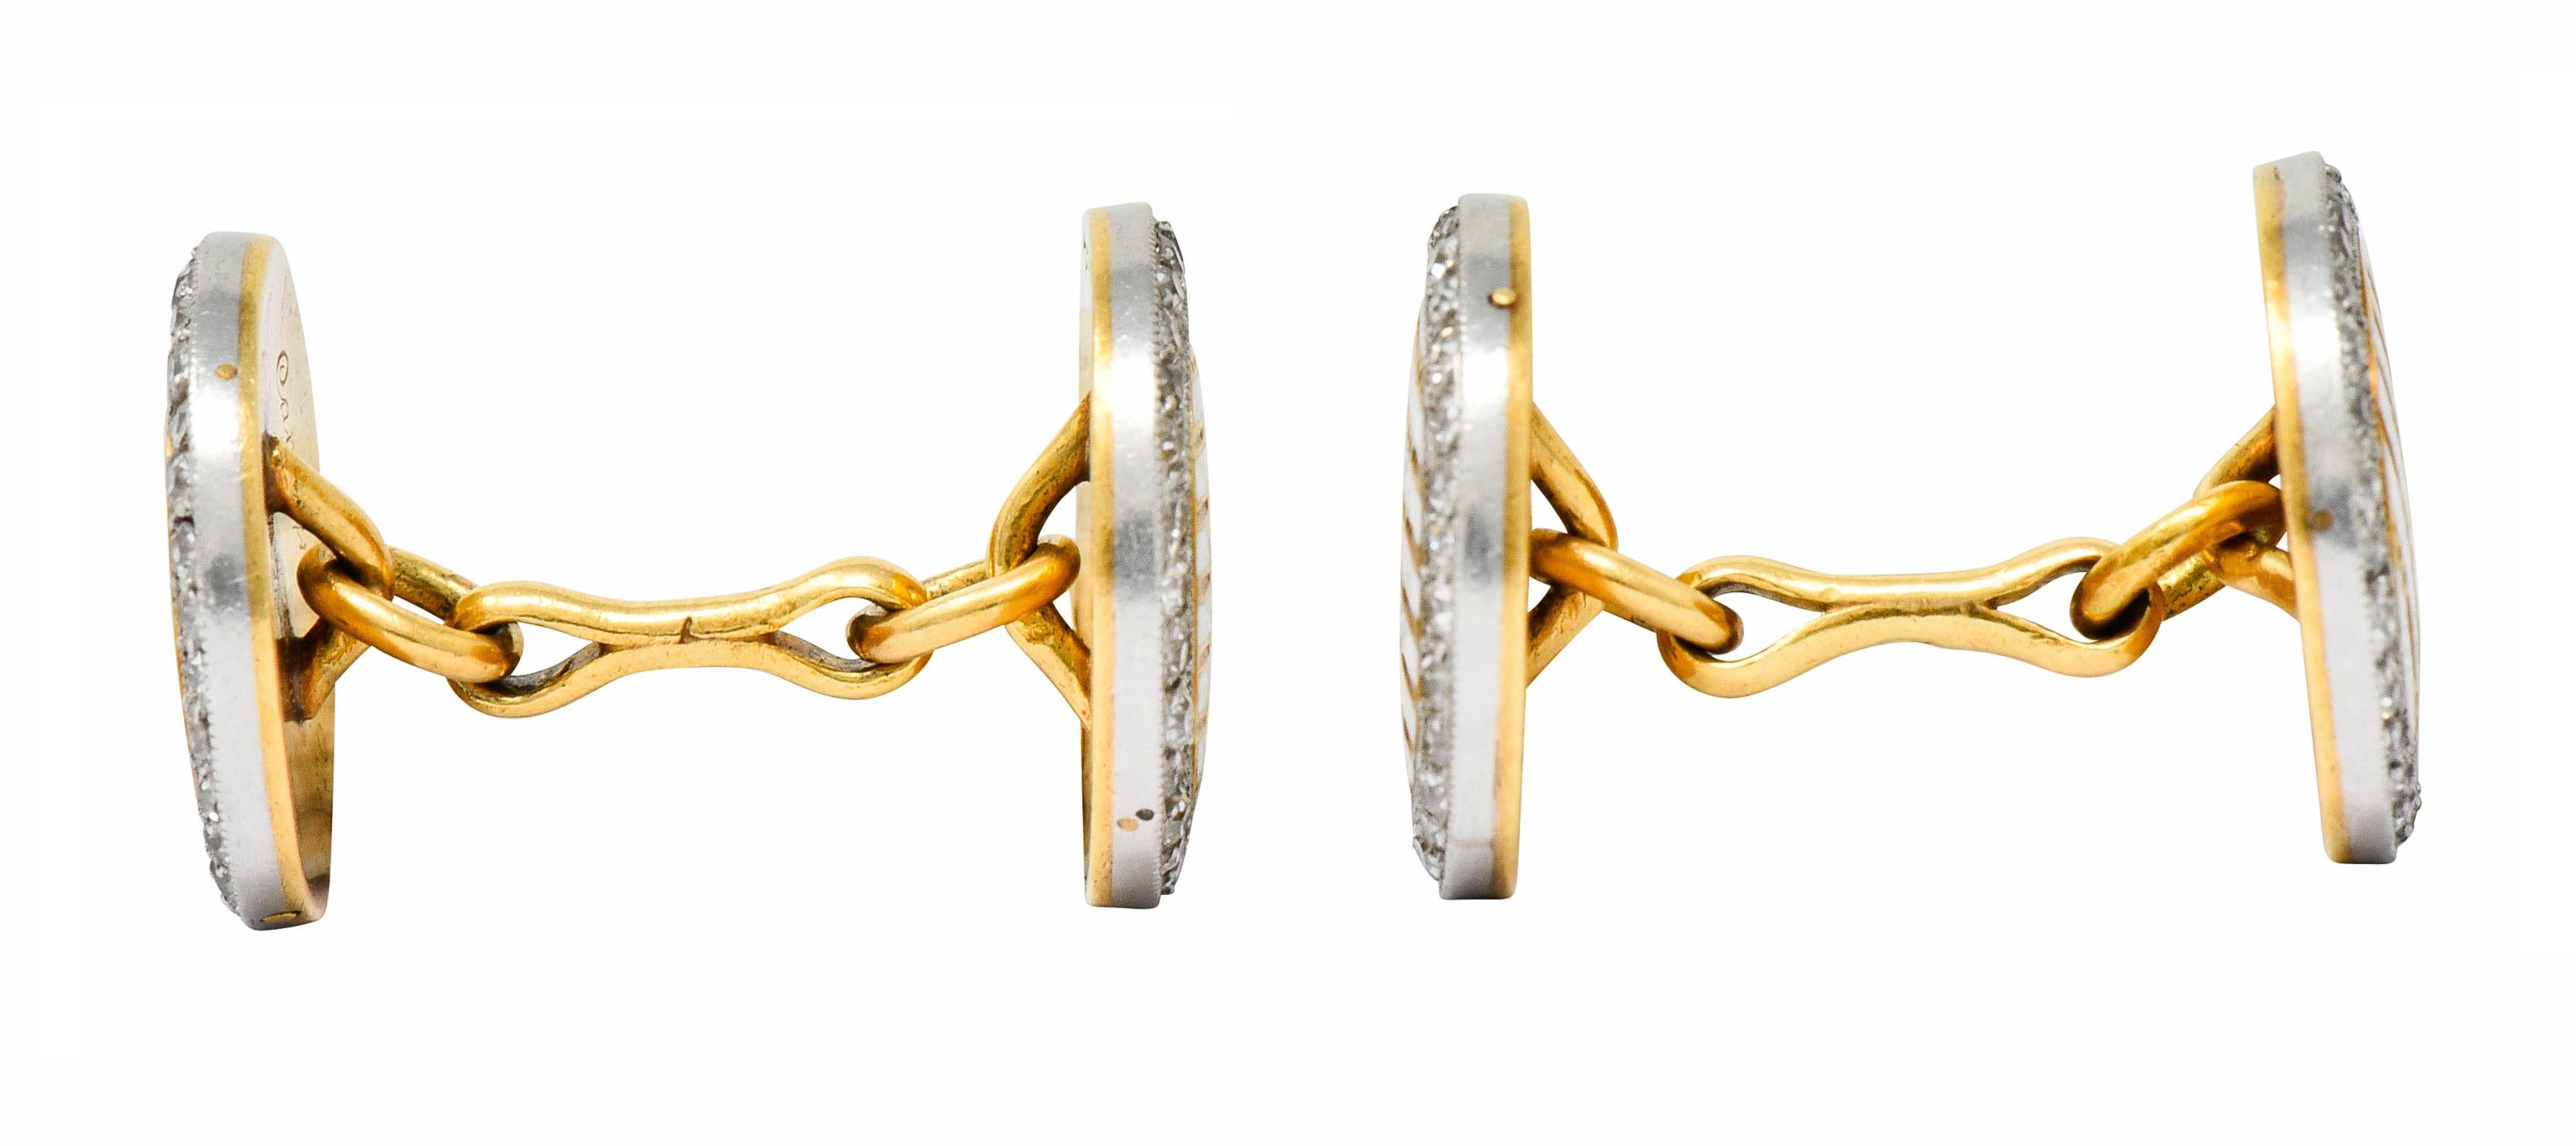 Link style cufflinks with circular disks at each end

Featuring a striped design of white enamel alternating with engraved gold; exhibiting minimal loss

Surrounded by a halo of single cut diamonds weighing in total approximately 1.25 carats; G to J